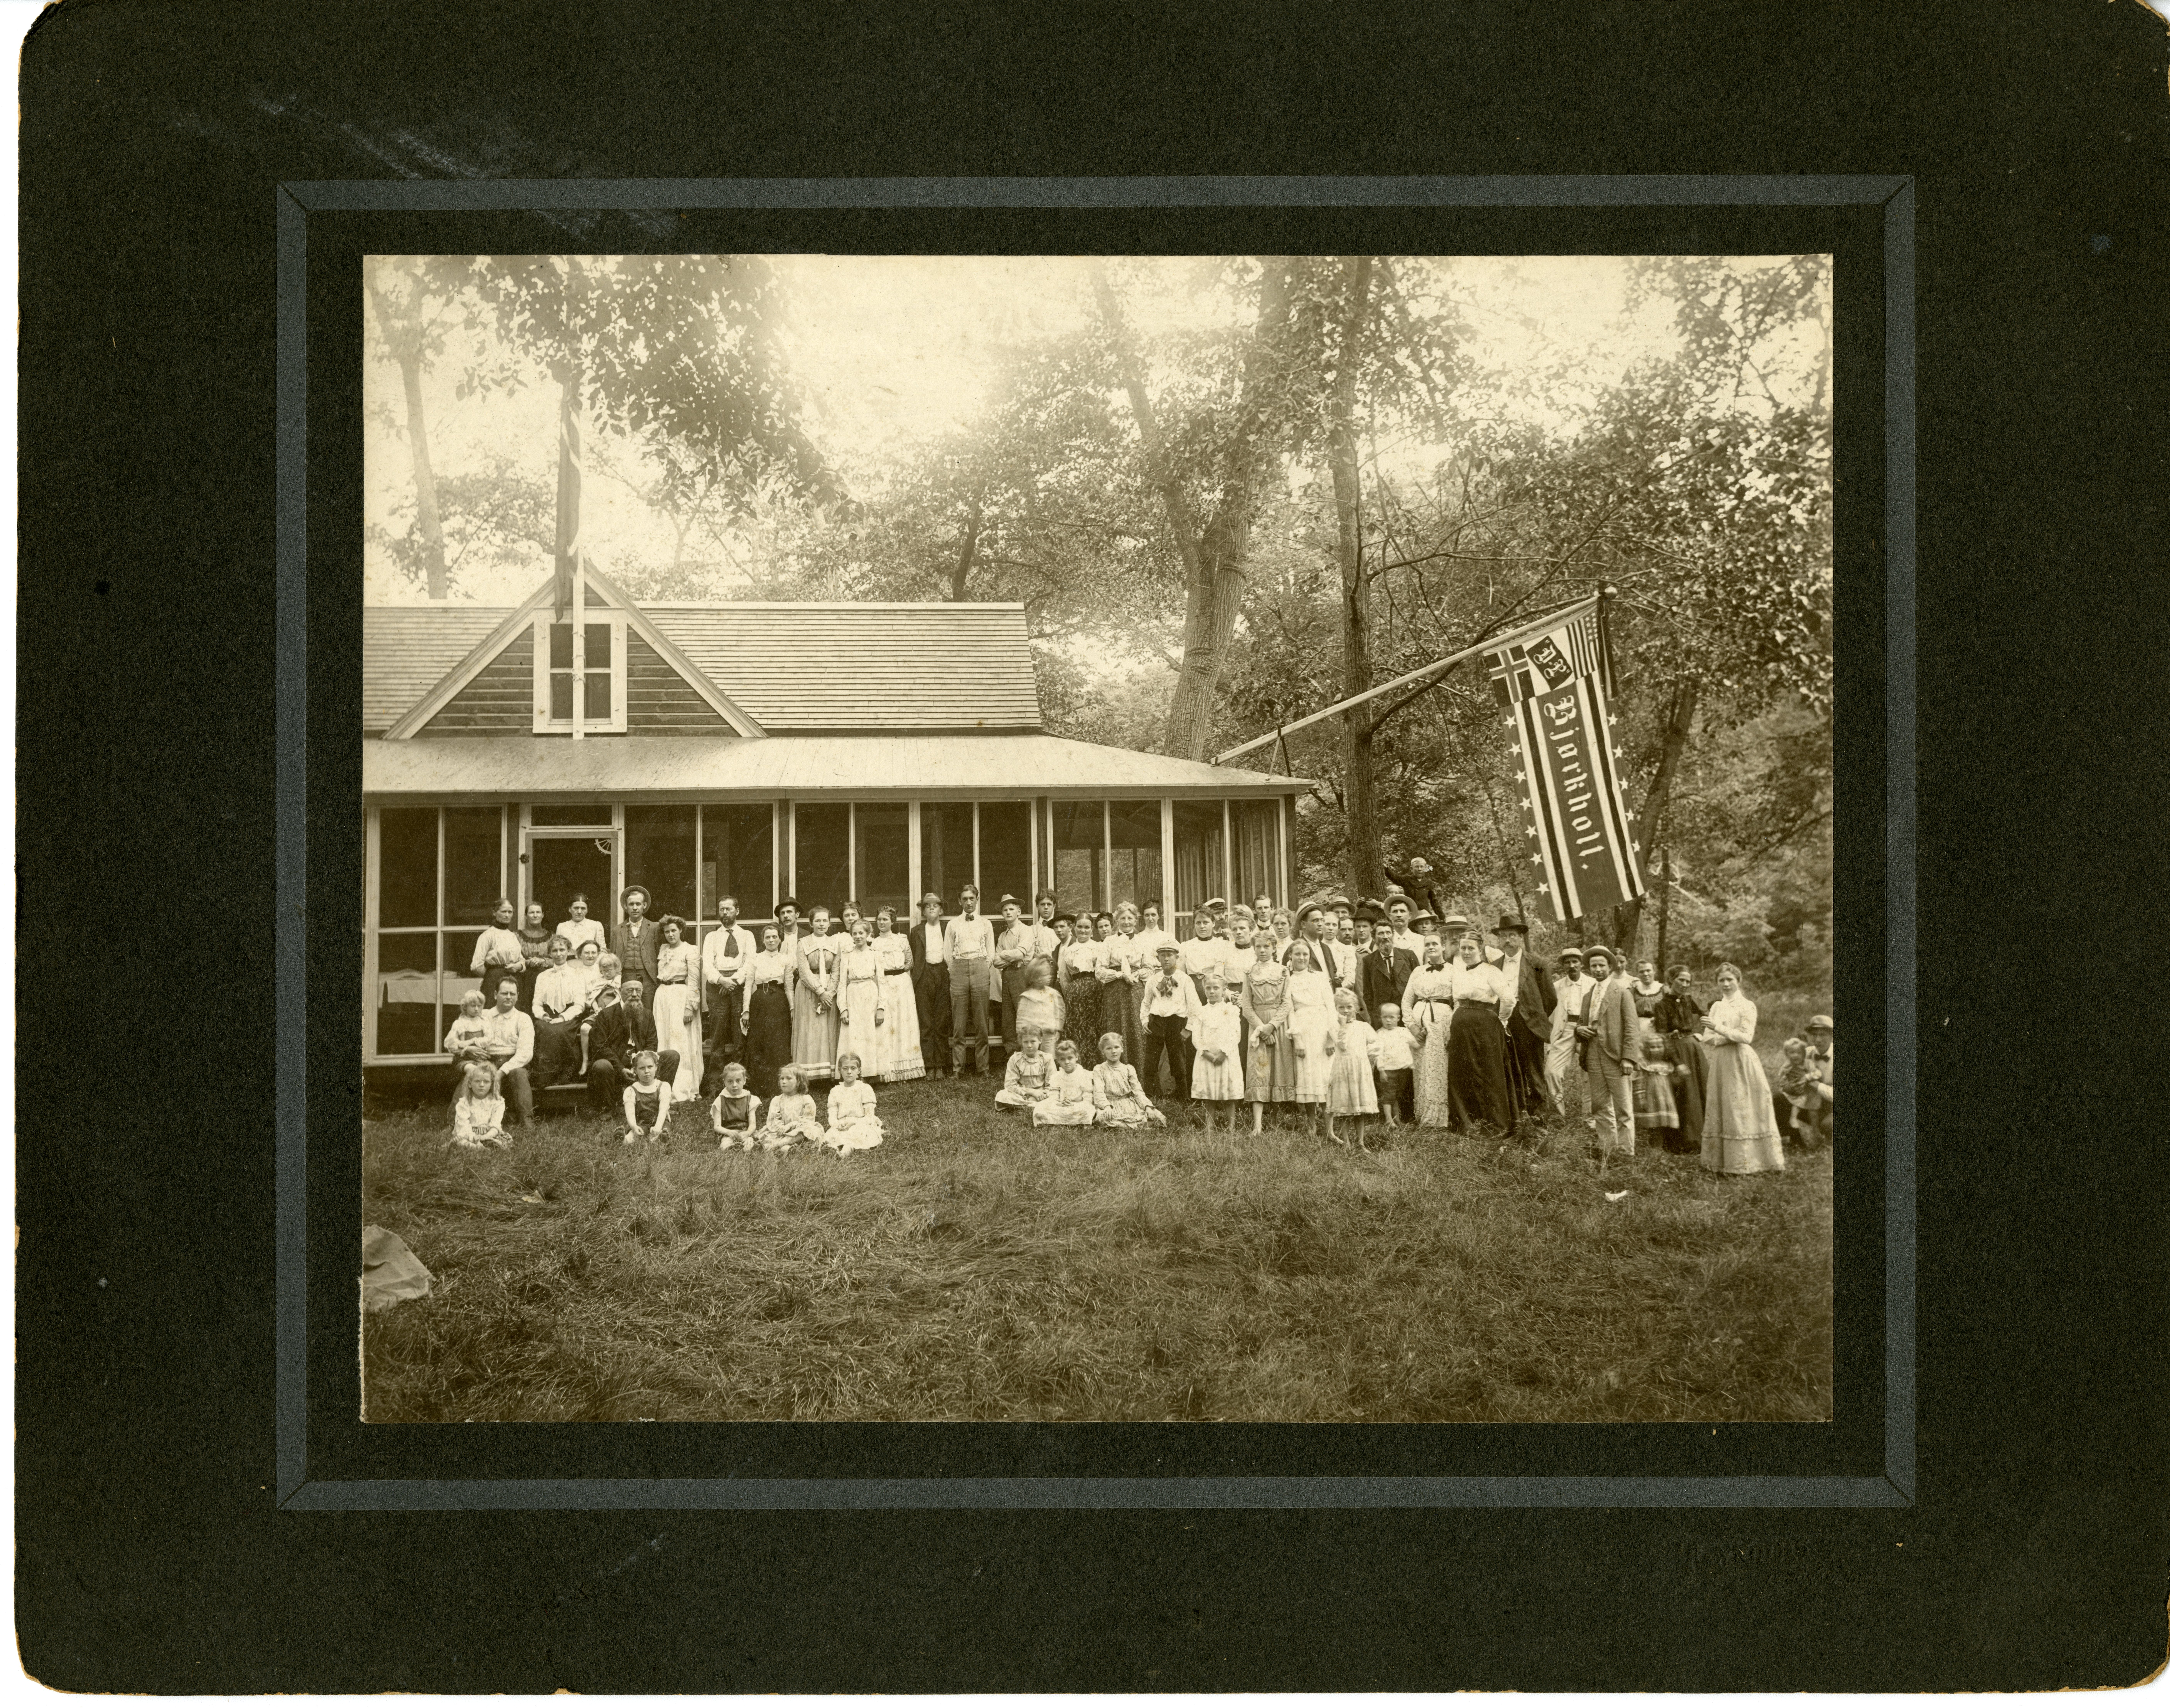 Large group of men, women, and children outside of a house, possibly a family reunion.